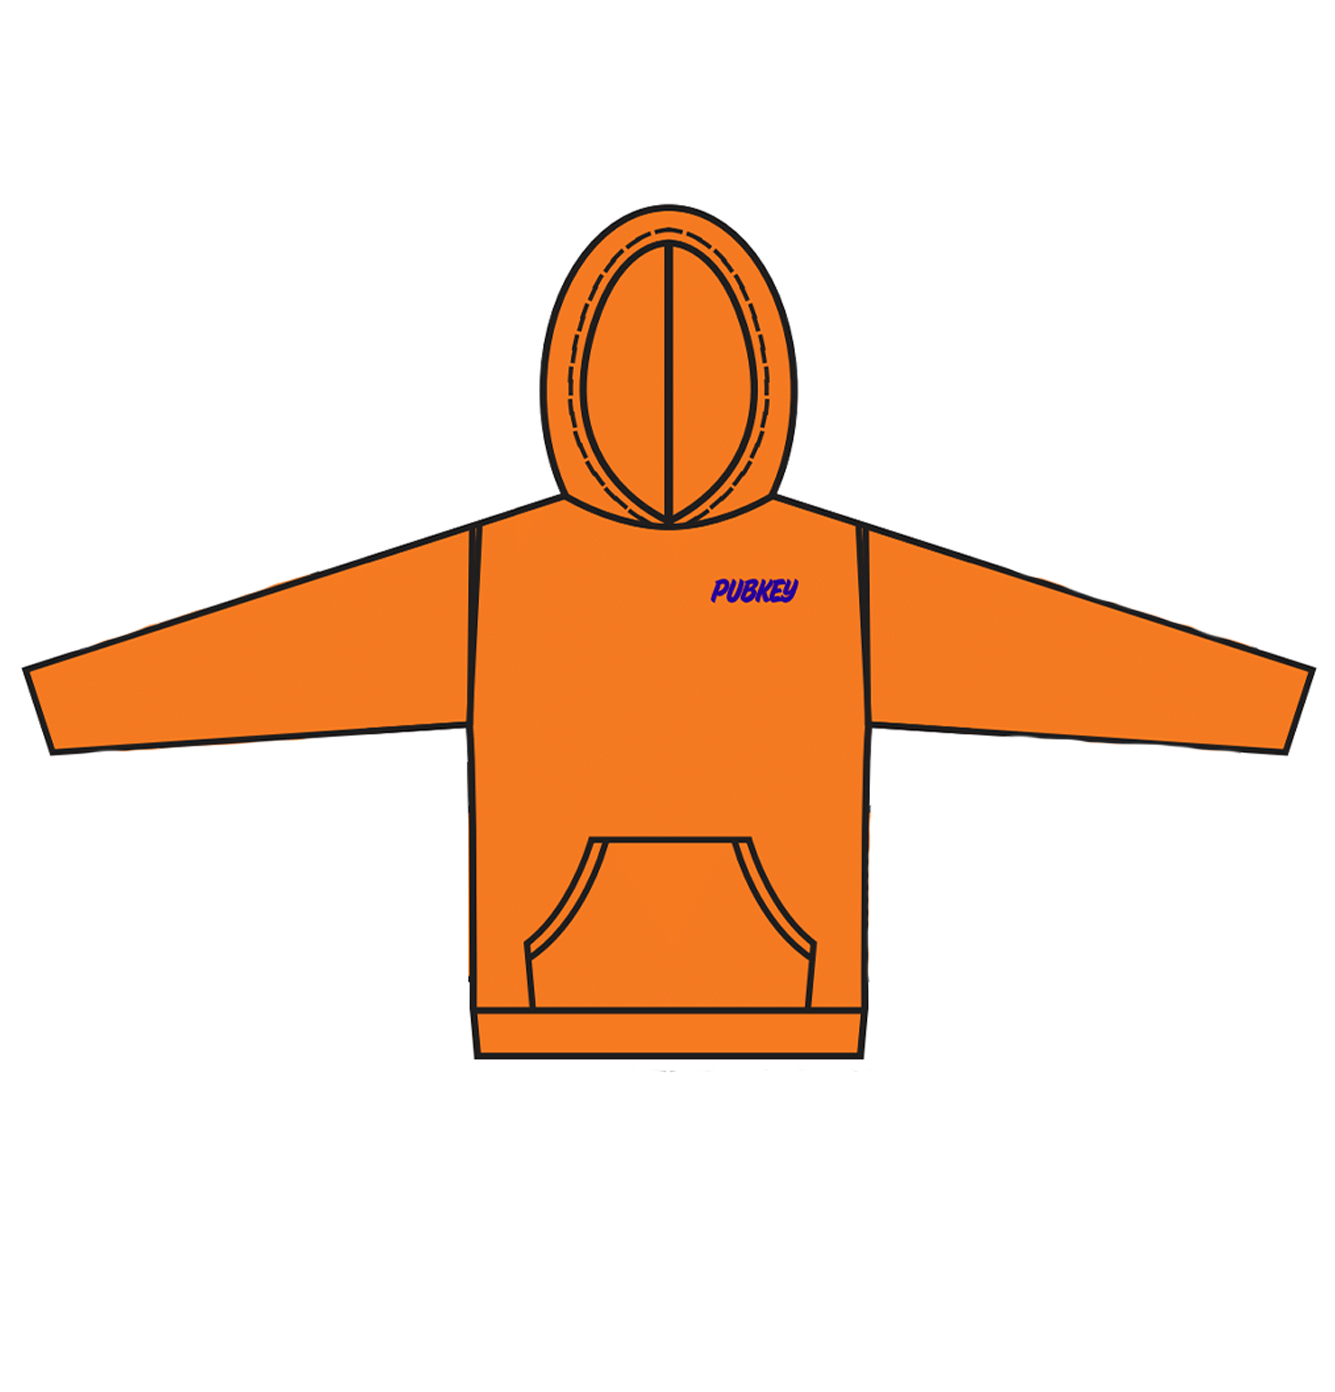 Orange Hoodie - Thank You For Your Time